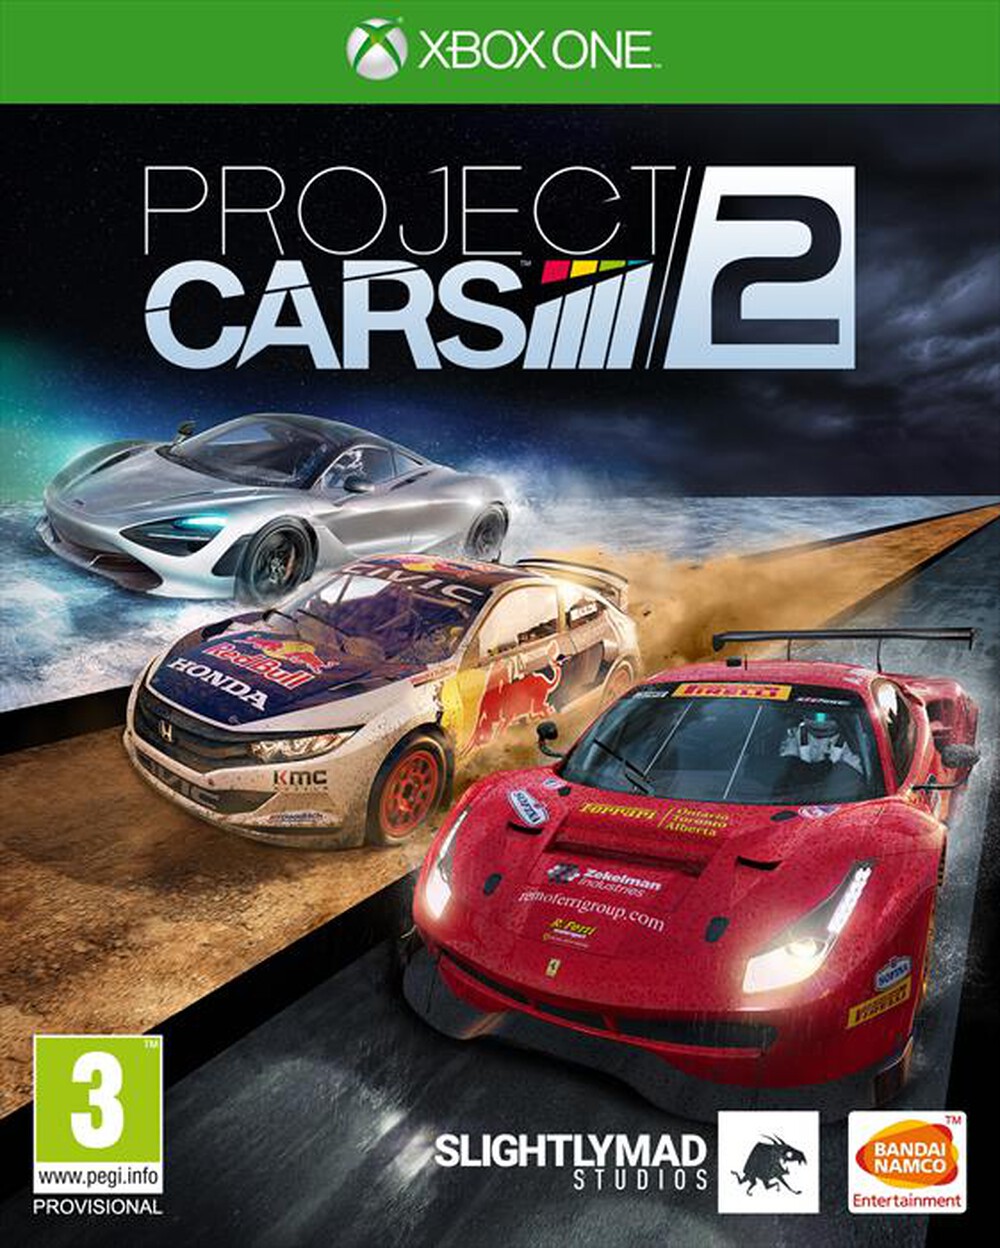 "NAMCO - Project Cars 2 Xbox One"